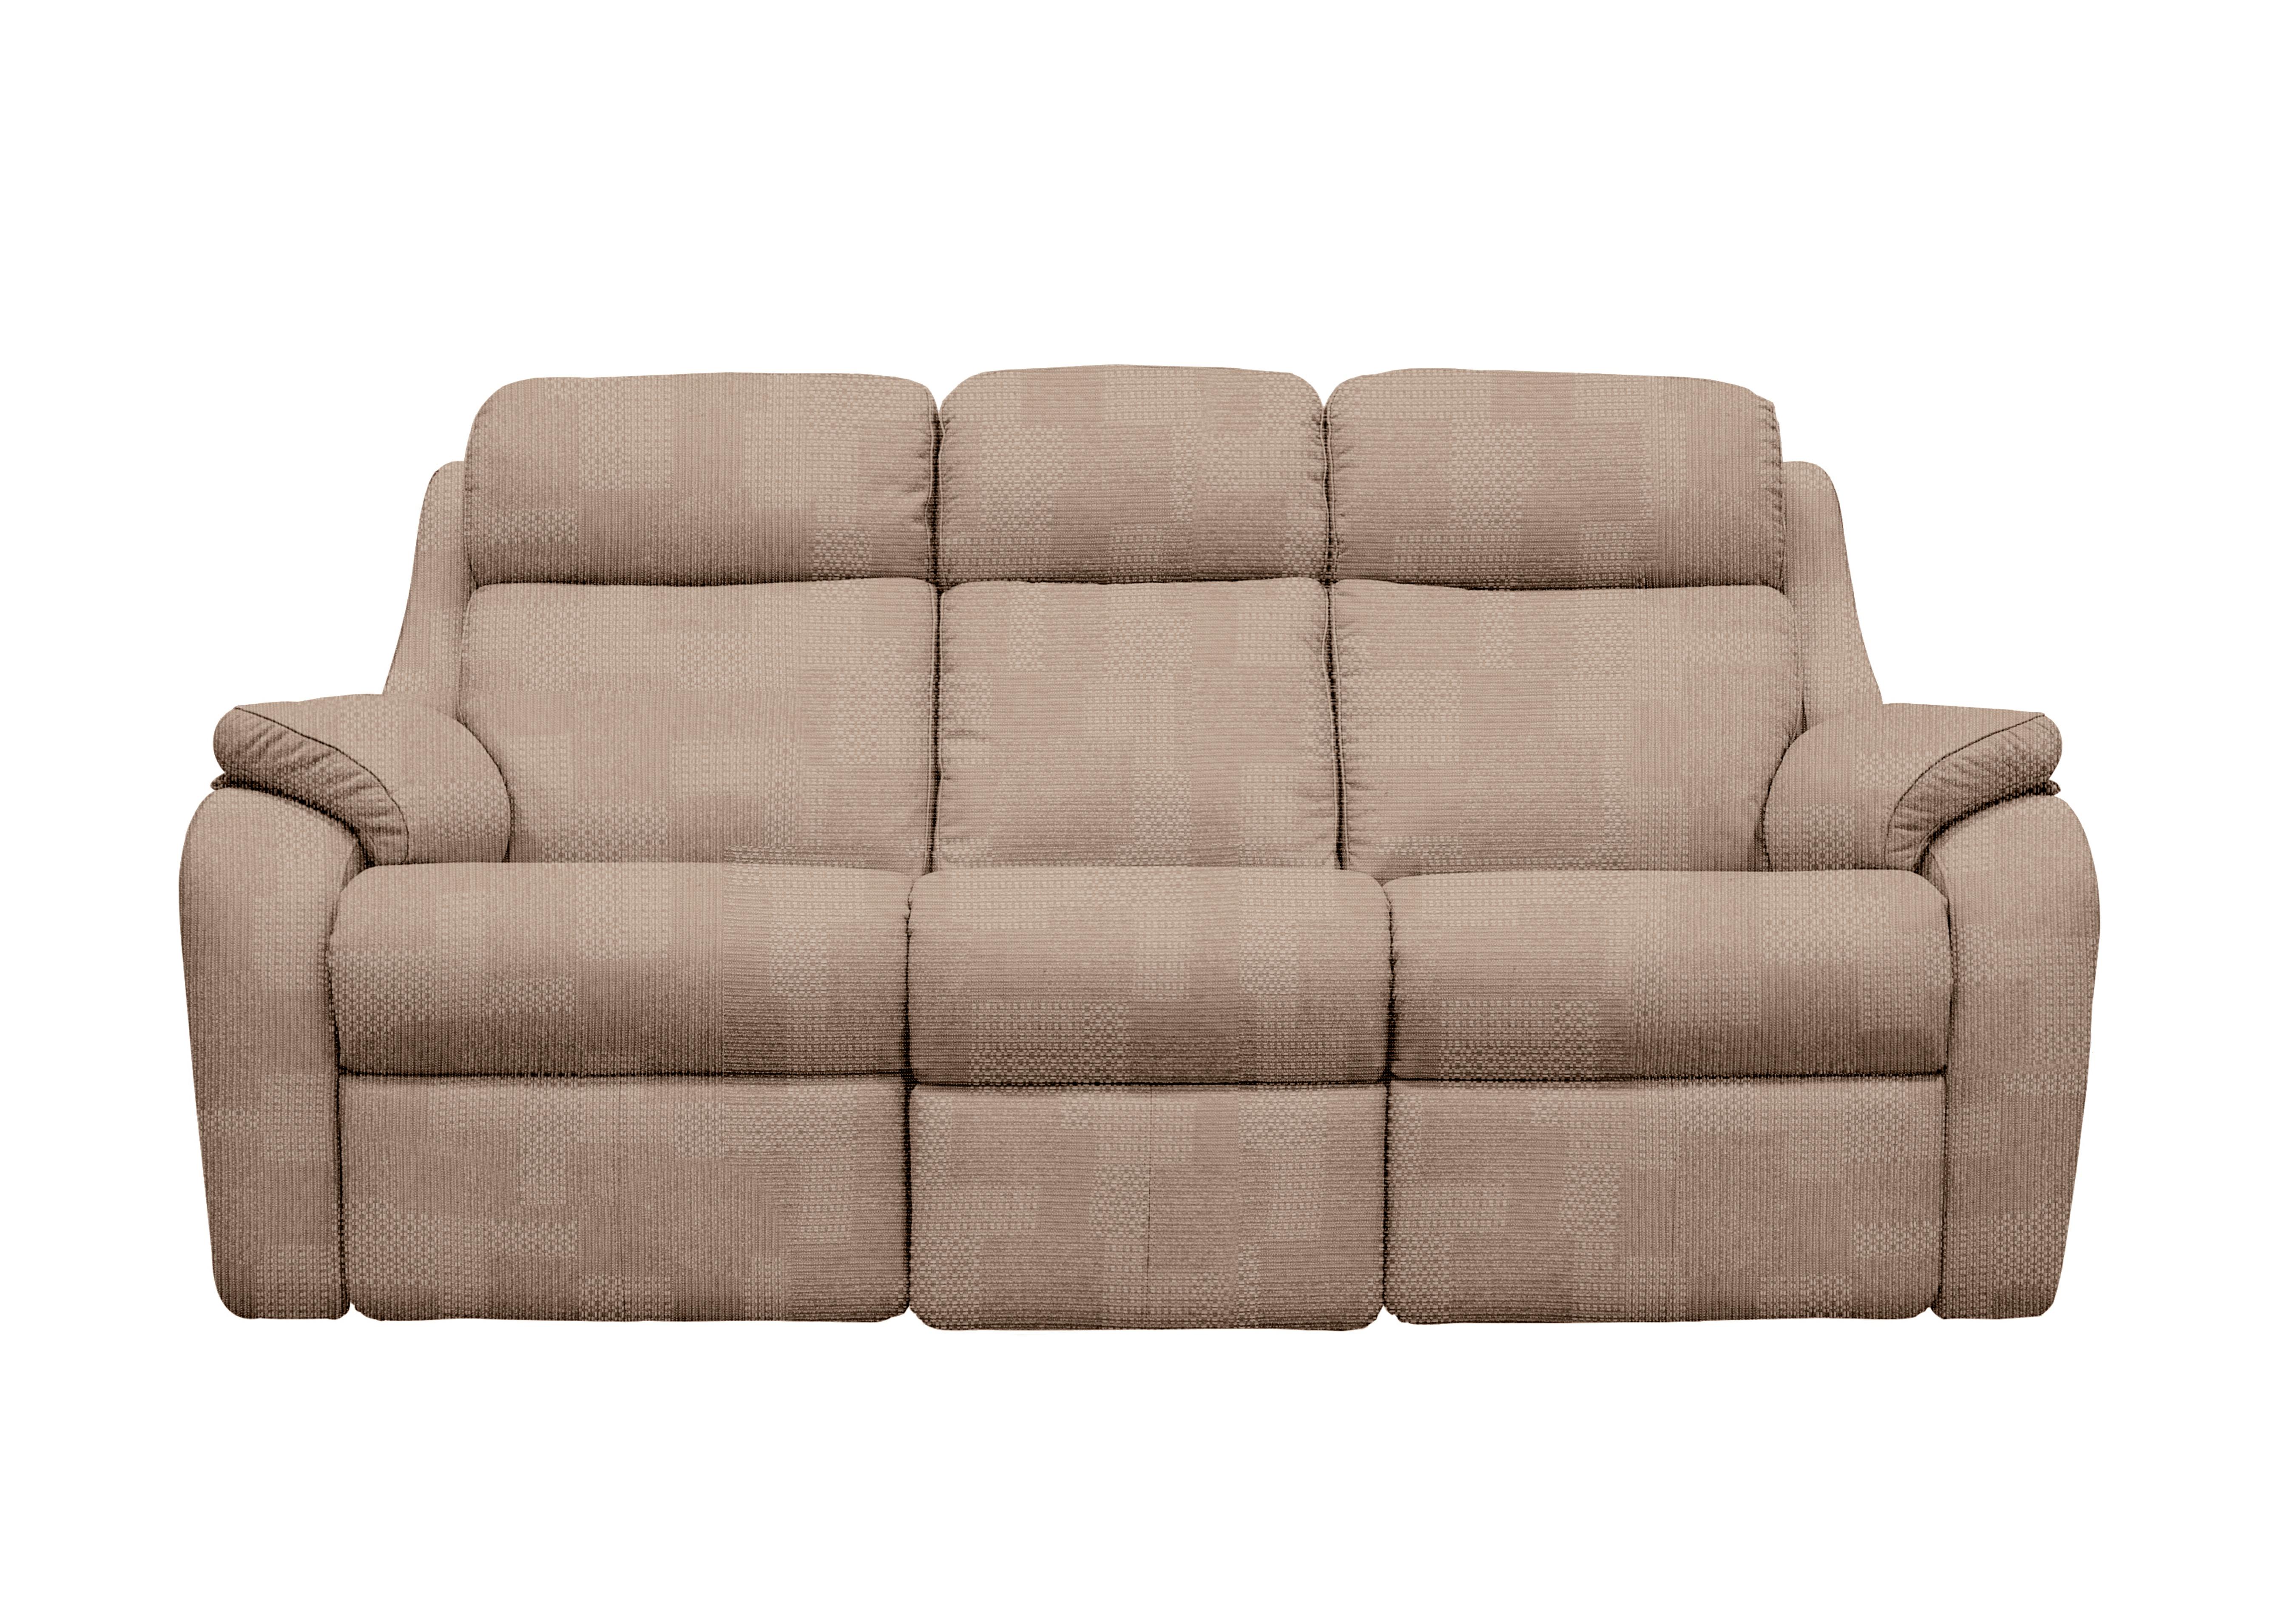 Kingsbury 3 Seater Fabric Power Recliner Sofa with Power Headrests in A800 Faro Sand on Furniture Village